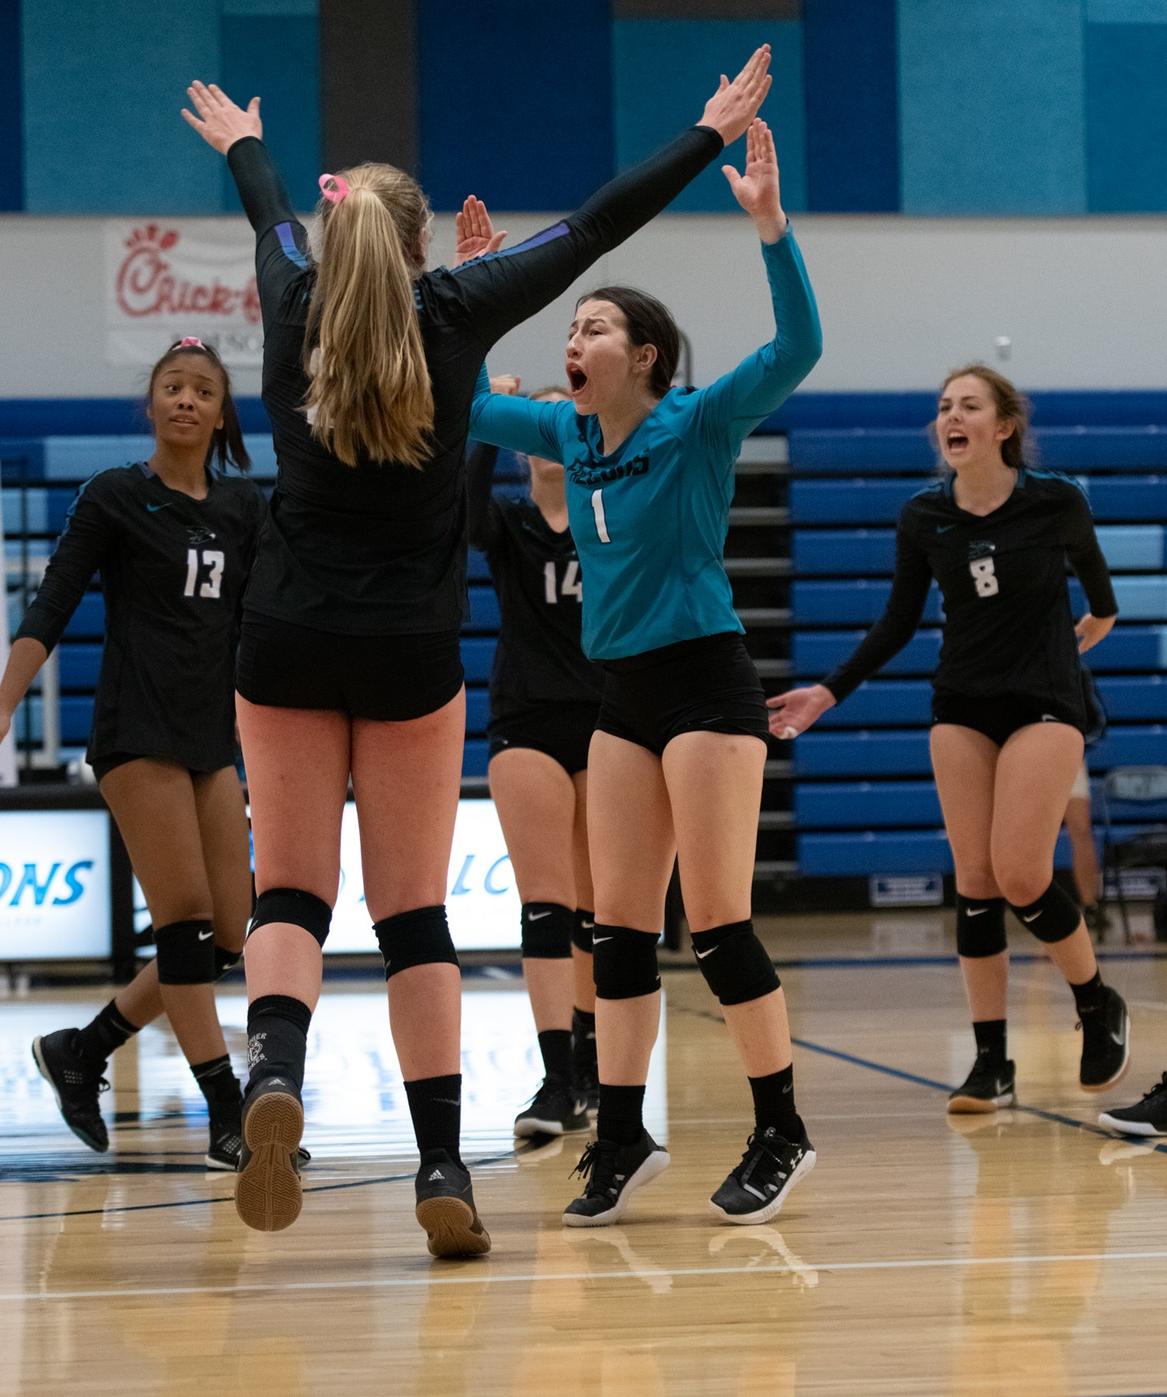 Falcons rally to upset Delta in 5 sets